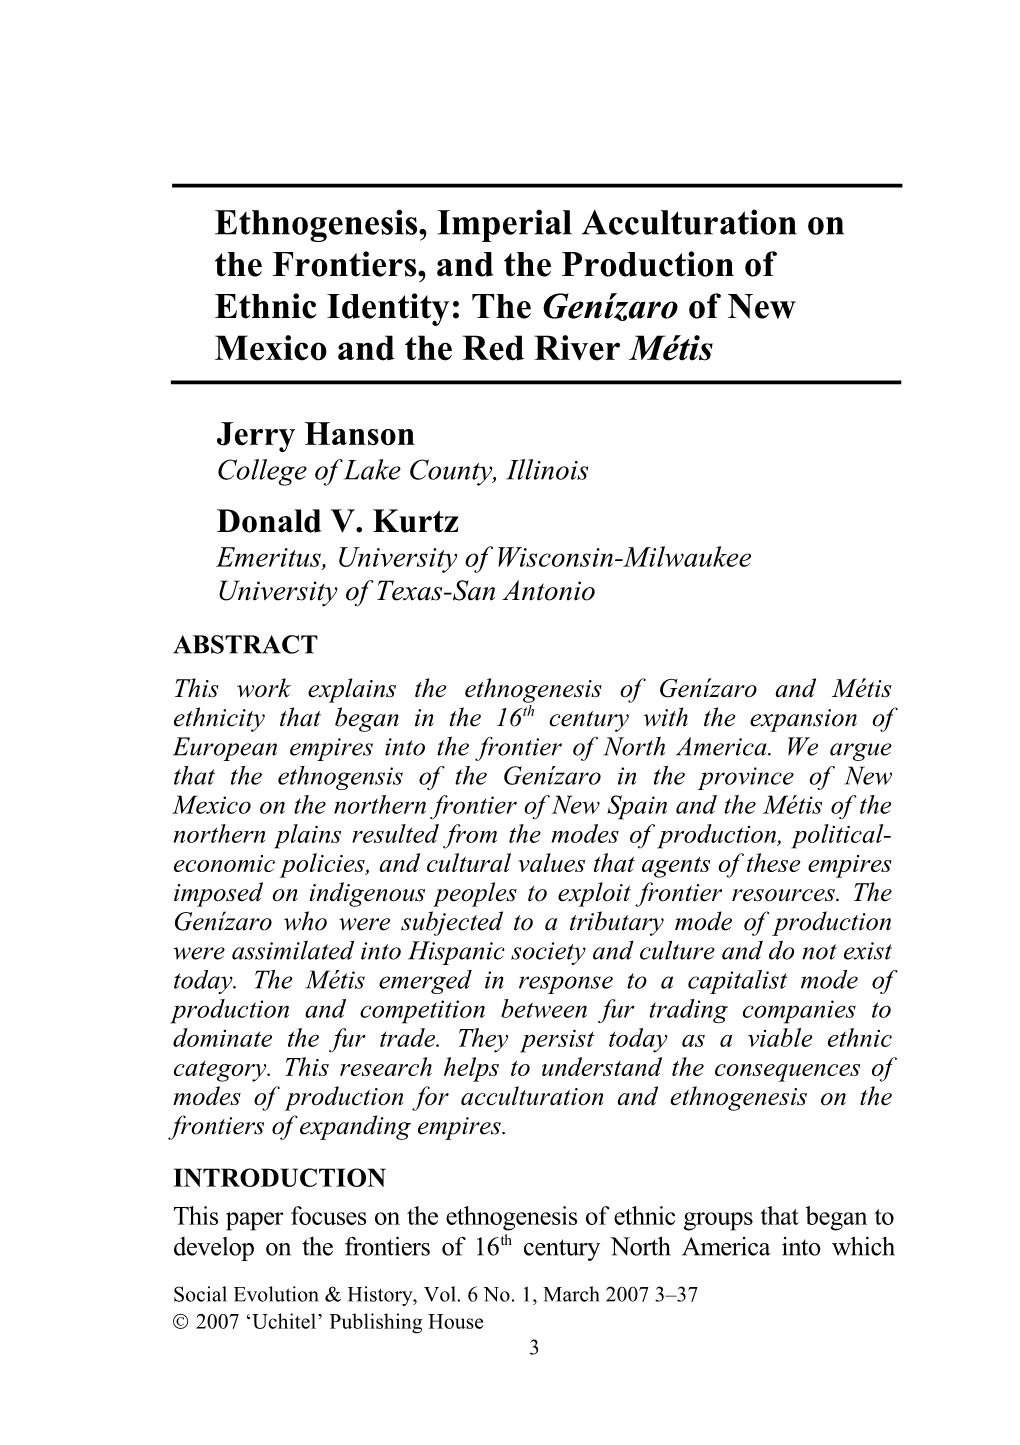 Colonial Acculturation on the Frontiers and the Production of Ethnic Identity